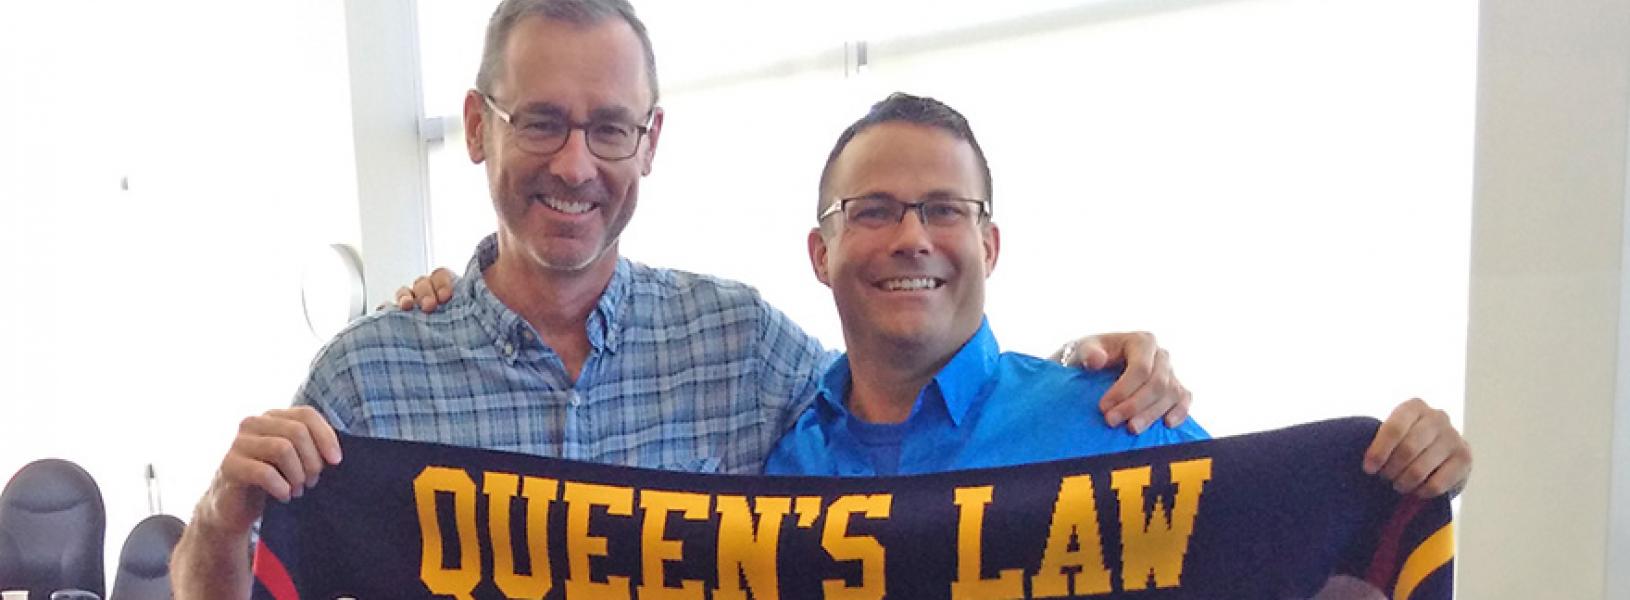 David Sharpe holds a Queen's Law scarf with Dean Flanagan